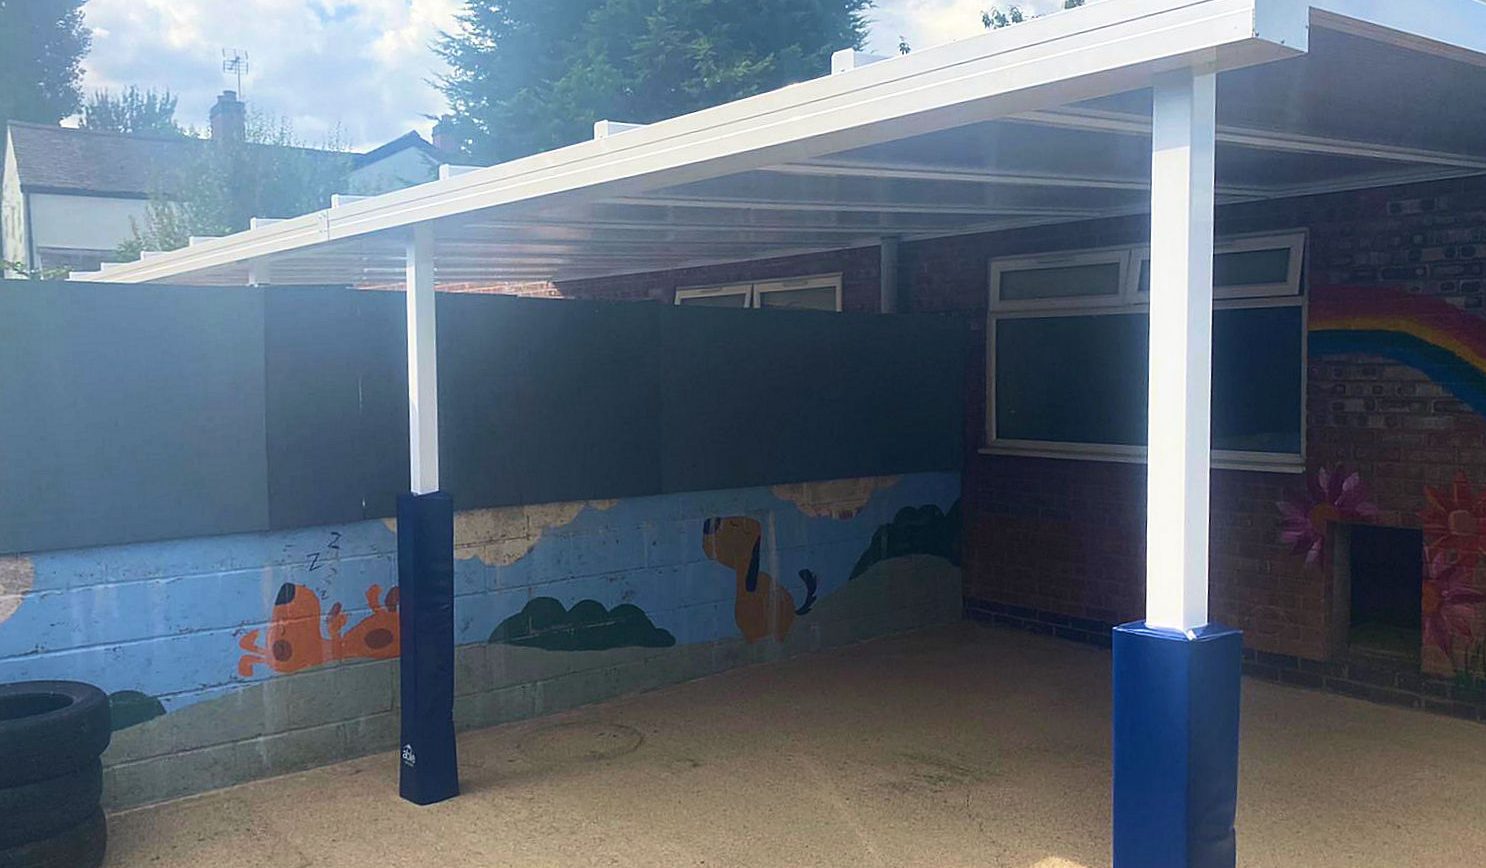 Leicester Animal Aid Association – Wall Mounted Canopy